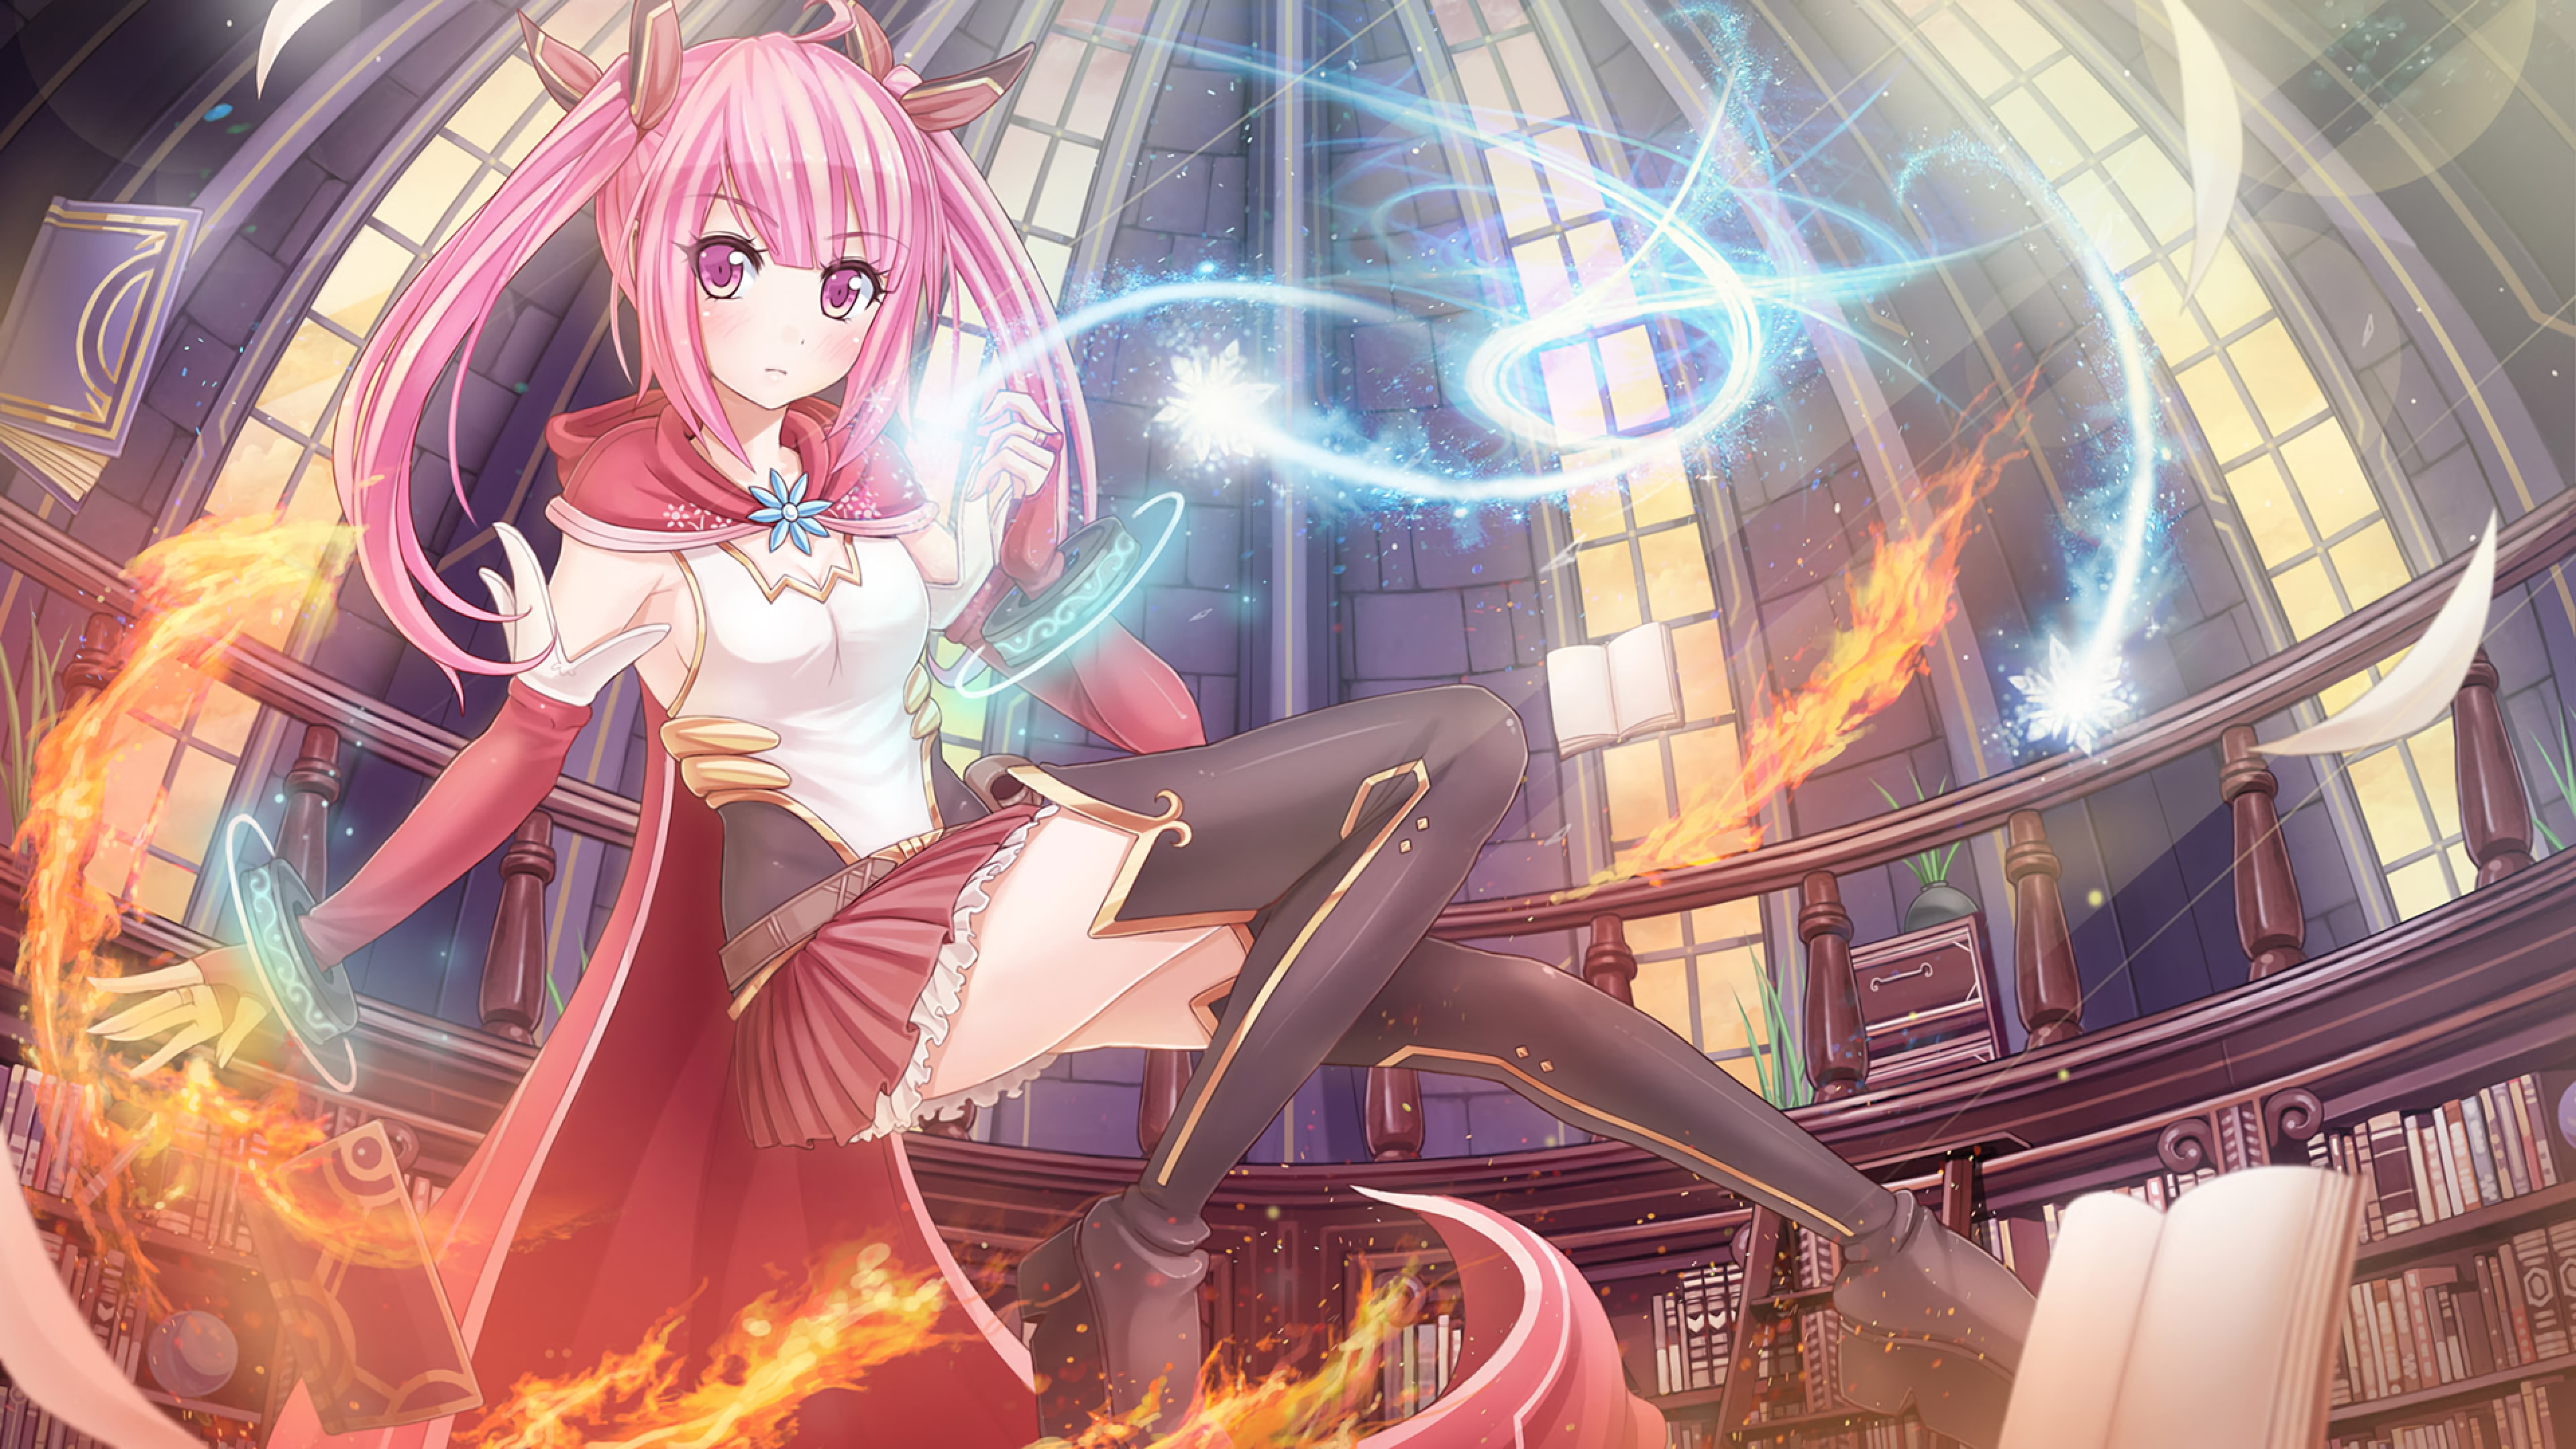 Download 3840x2160 Anime Girl, Magic, Fire, Wind, Pink Hair, Cape, Library Wallpaper for UHD TV